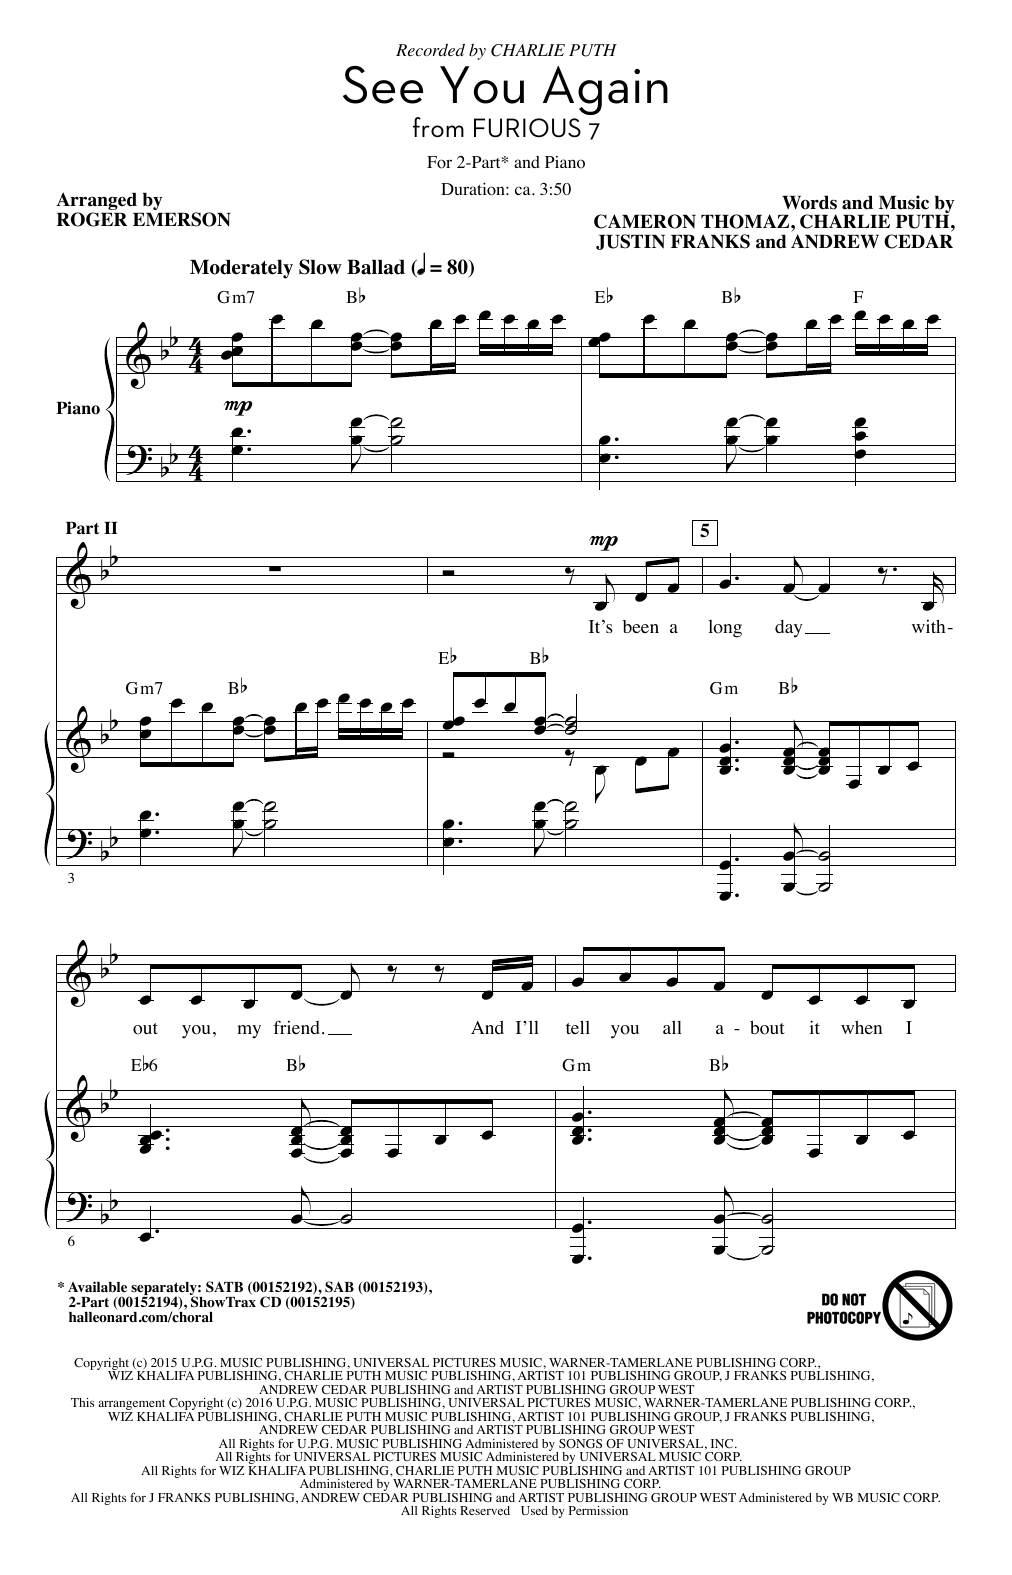 Download Wiz Khalifa See You Again (feat. Charlie Puth) (arr Sheet Music